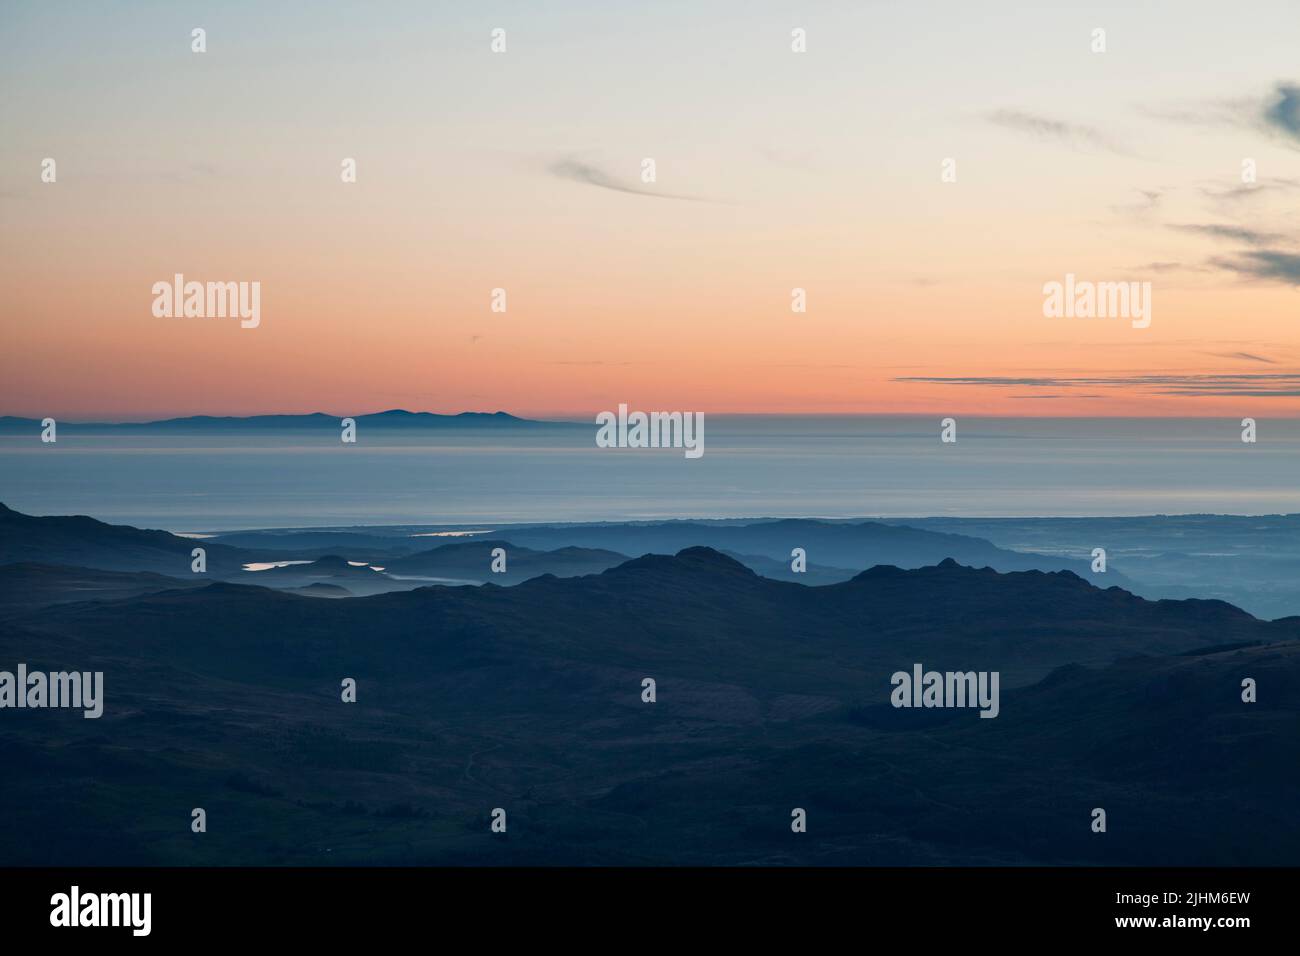 The Isle Of Man seen from the summit of Brim Fell in the English Lake District at dusk Stock Photo